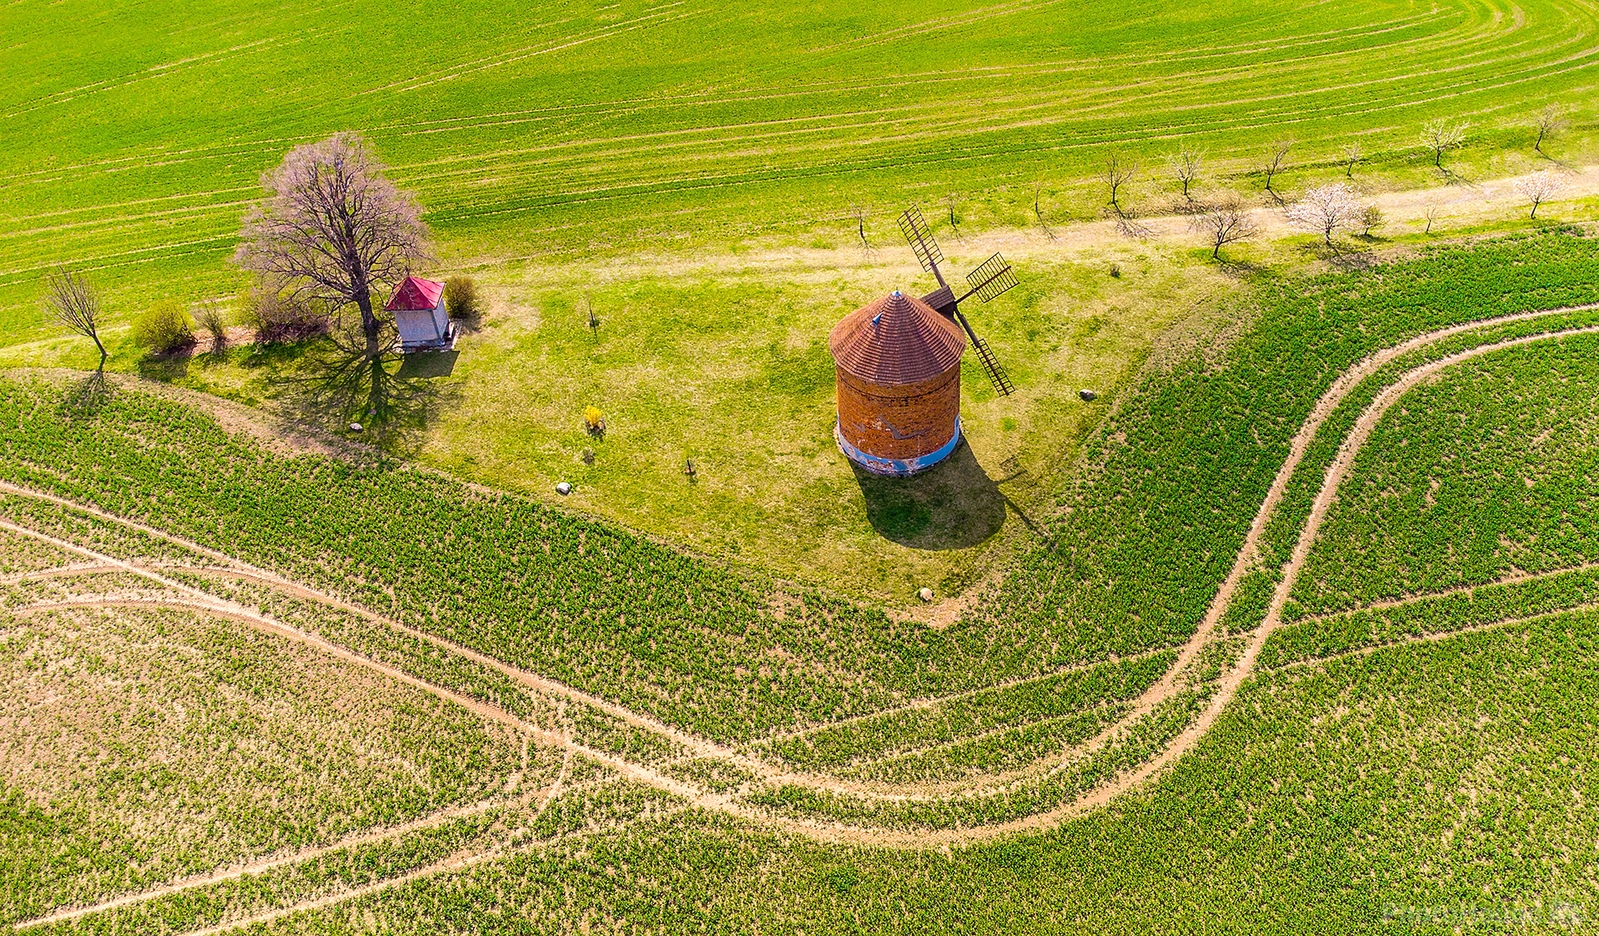 Image of Chvalkovice windmill by Simon Kovacic